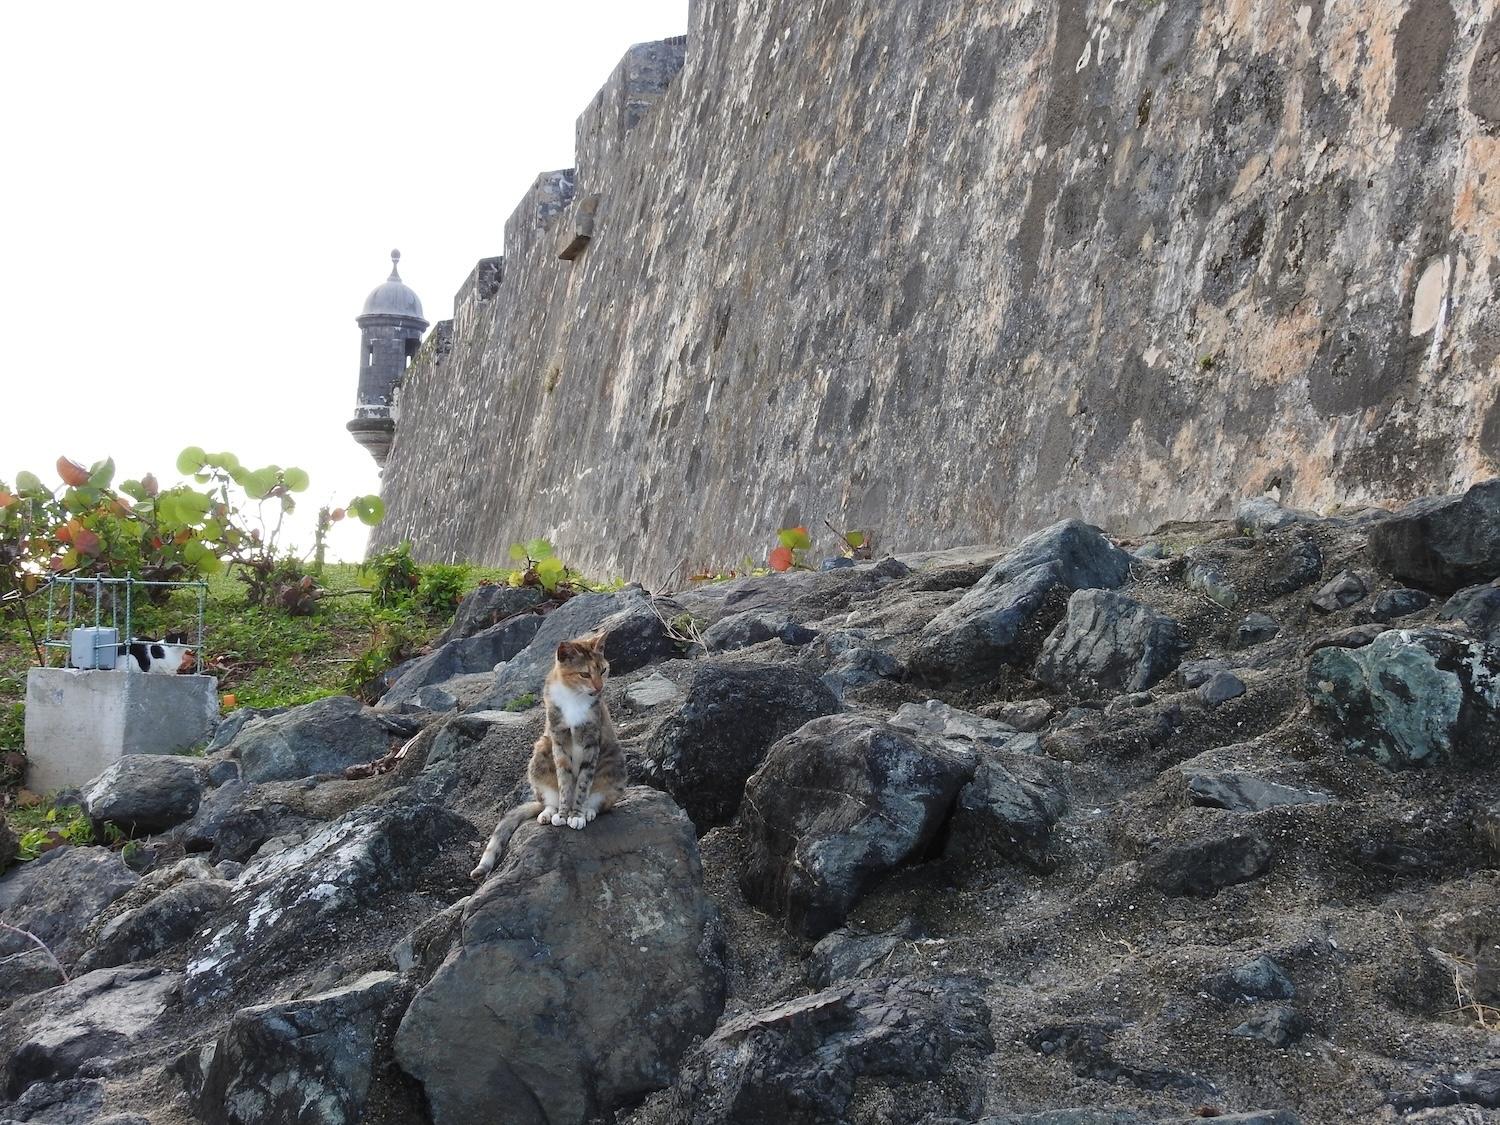 Two cats relax in the rocks along the Paseo del Morro walkway by the historic walls of Old San Juan.